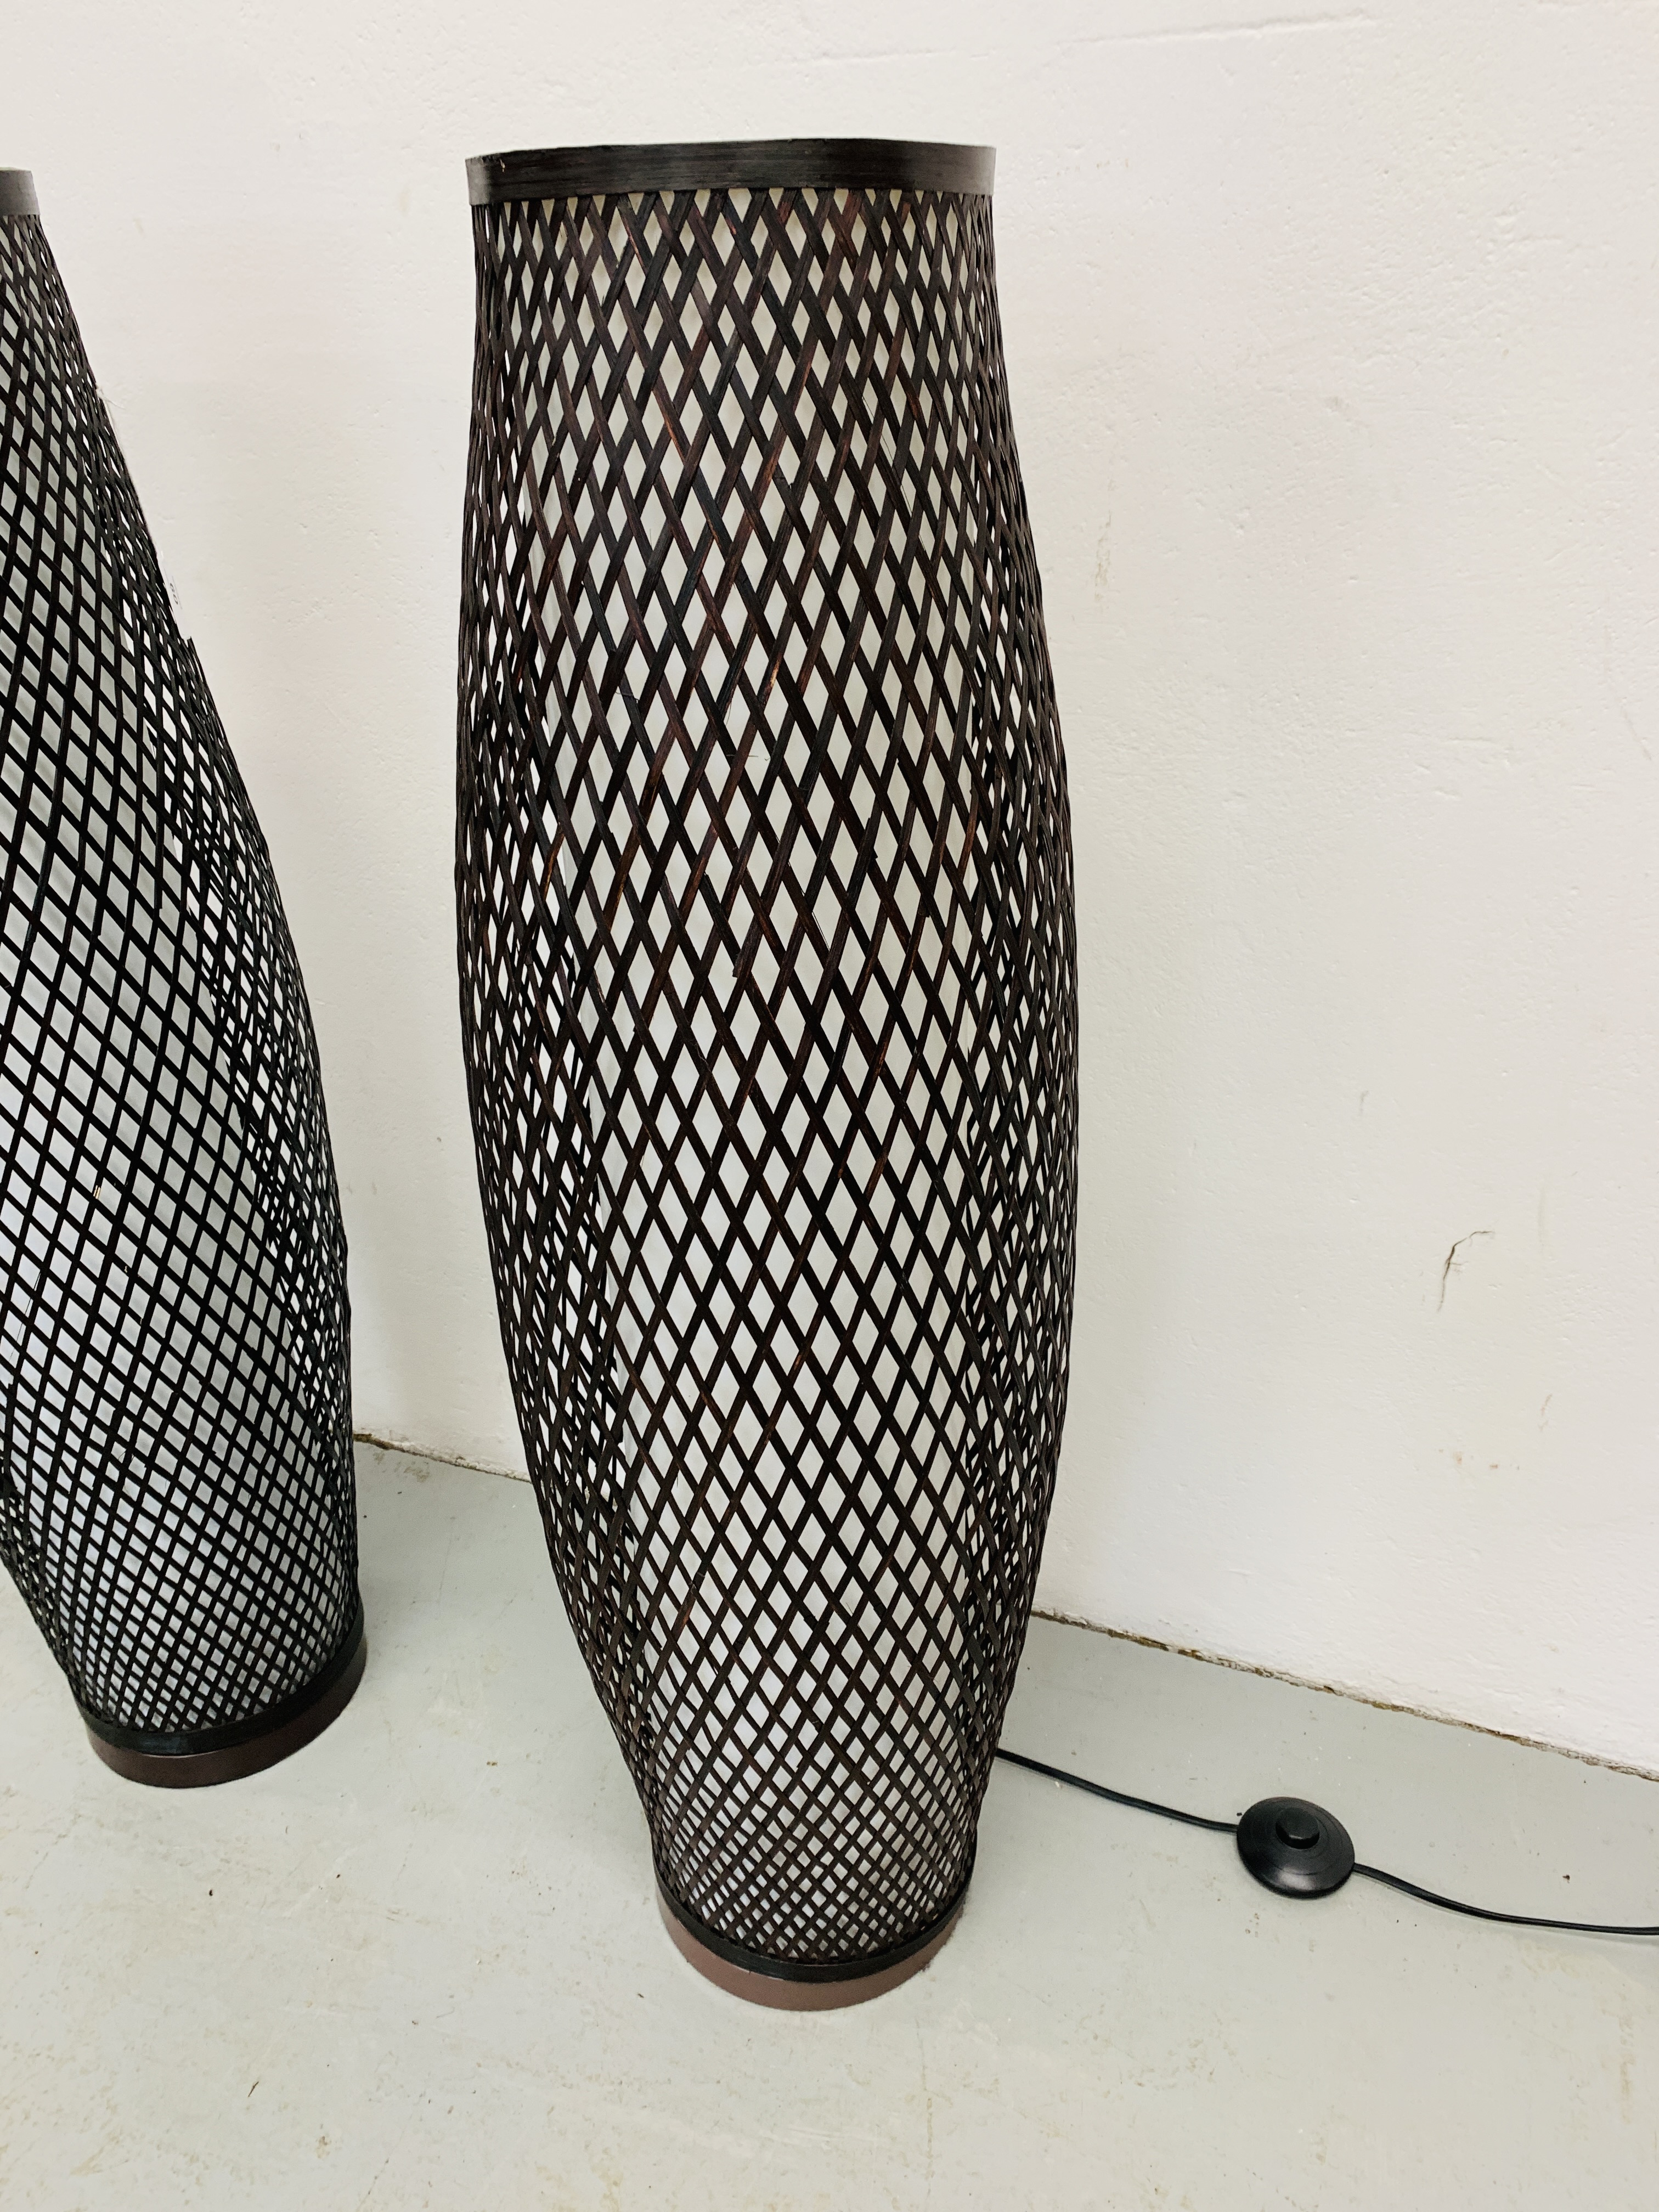 A PAIR OF WOVEN METAL CRAFT FLOOR STANDING LAMPS - HEIGHT 94CM - SOLD AS SEEN - Image 2 of 3